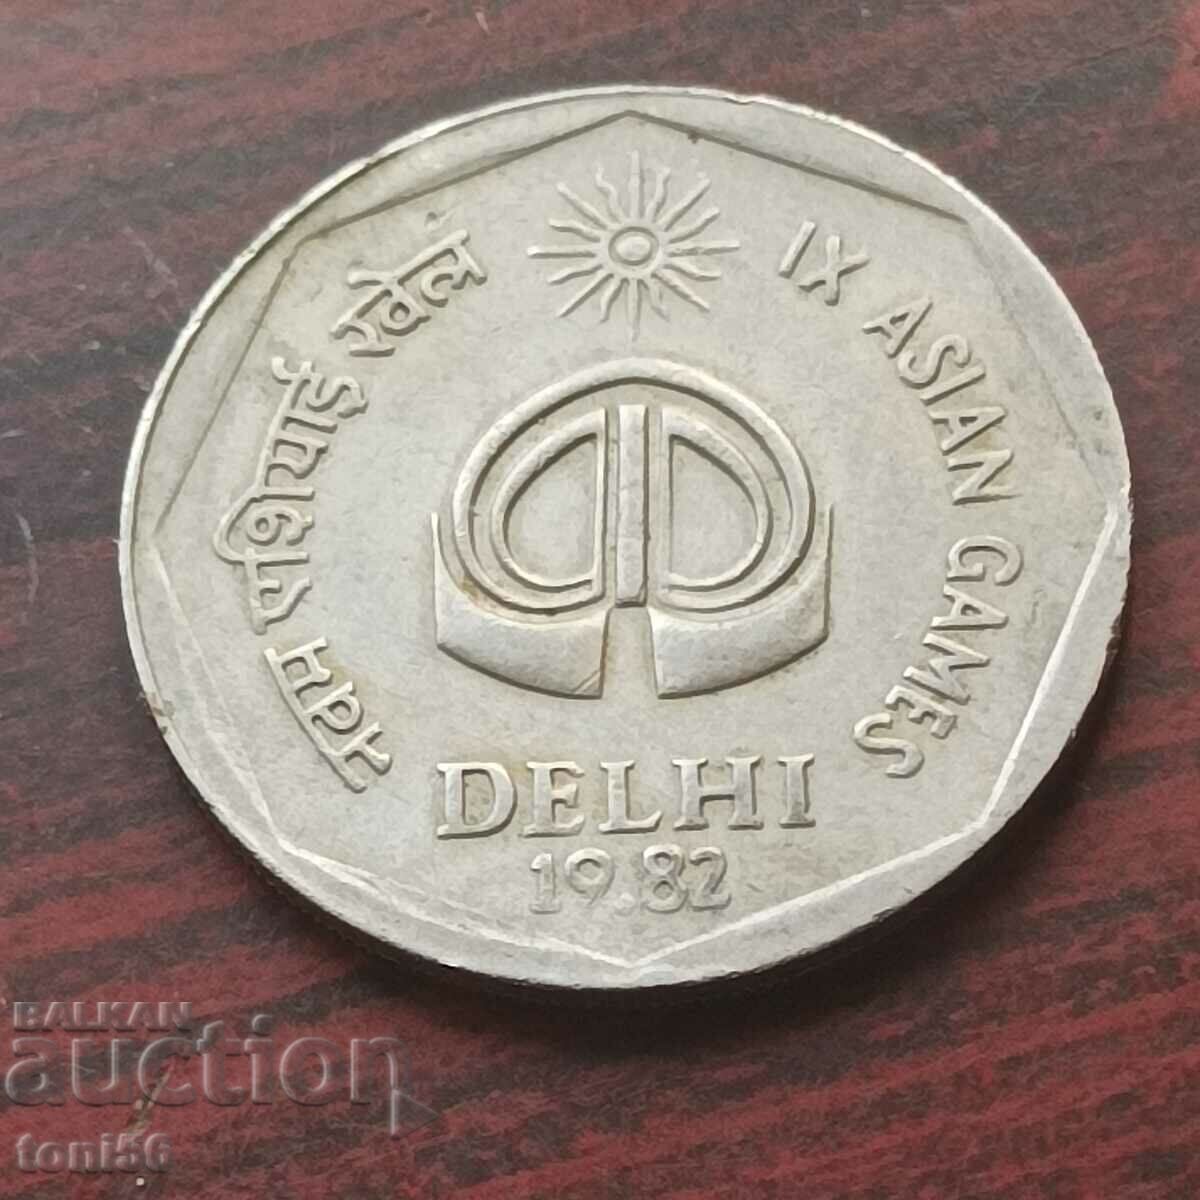 India 2 Rupees 1982 - Jubilee